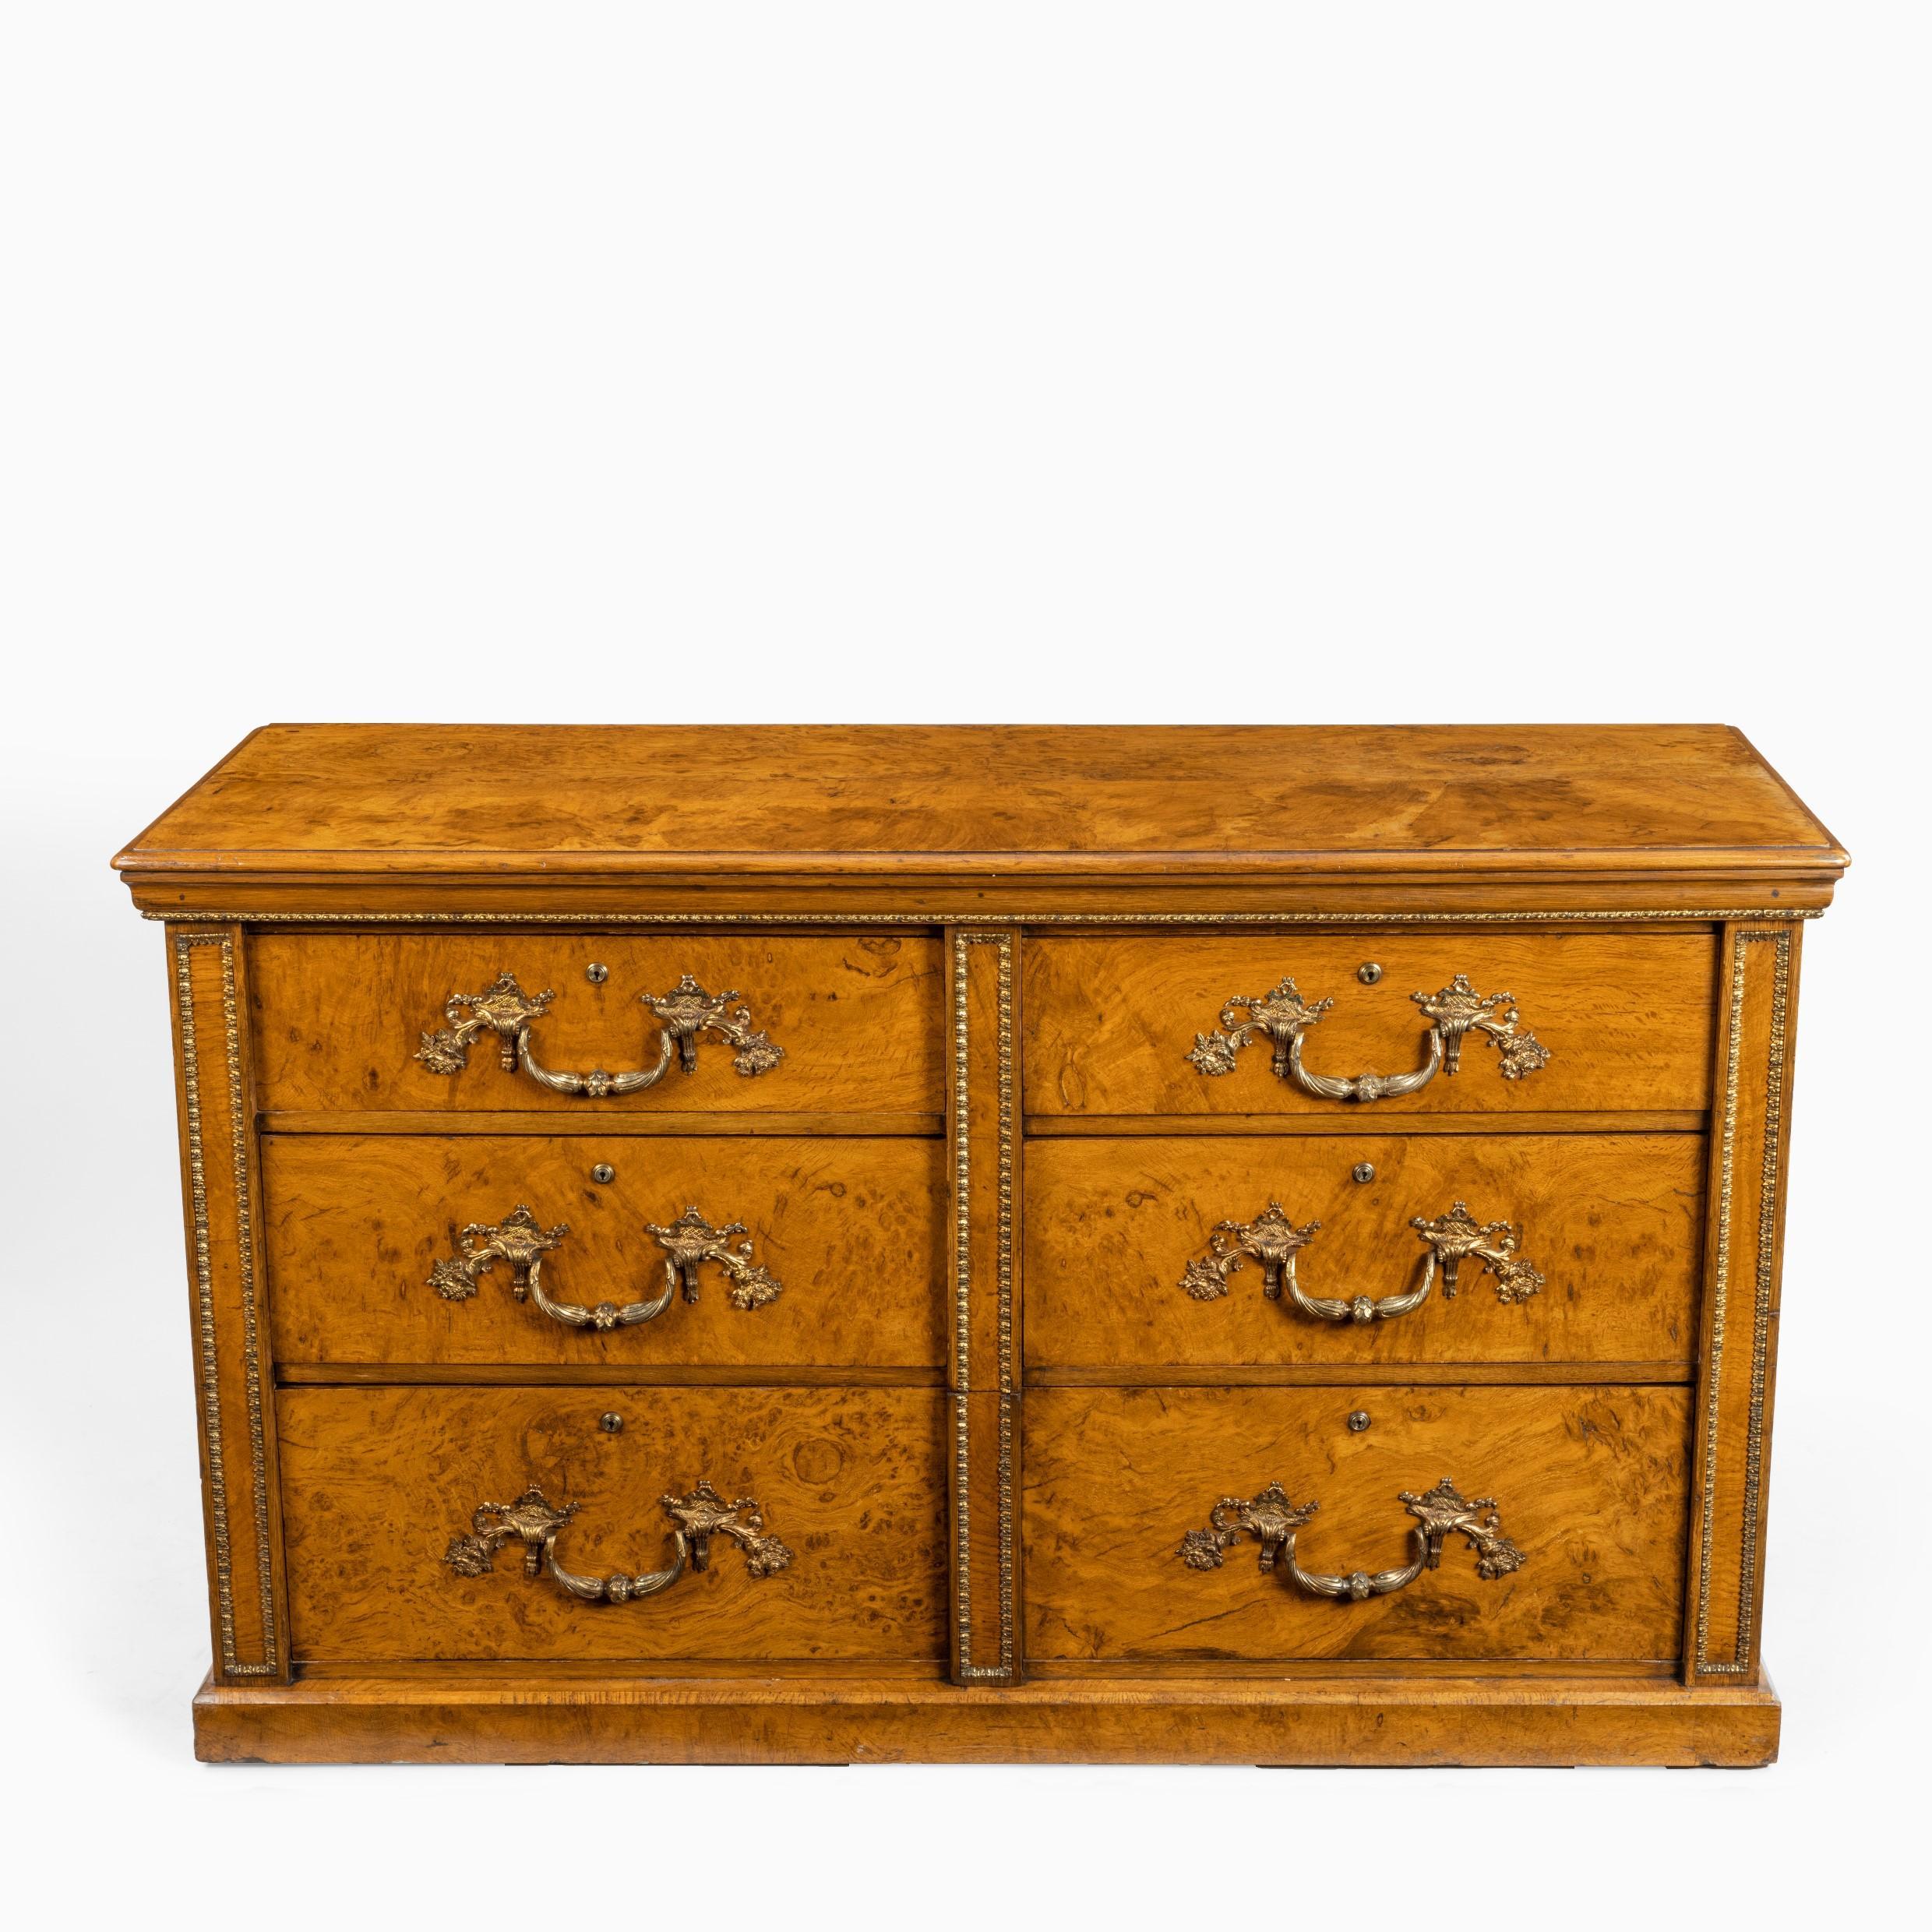 A fine George IV burr oak chest of drawers in the manner of Morel and Seddon, of rectangular form with three tiers comprising four short and one disguised long drawer, on a plinth base, decorated with ormolu edging and the original Rococo handles.